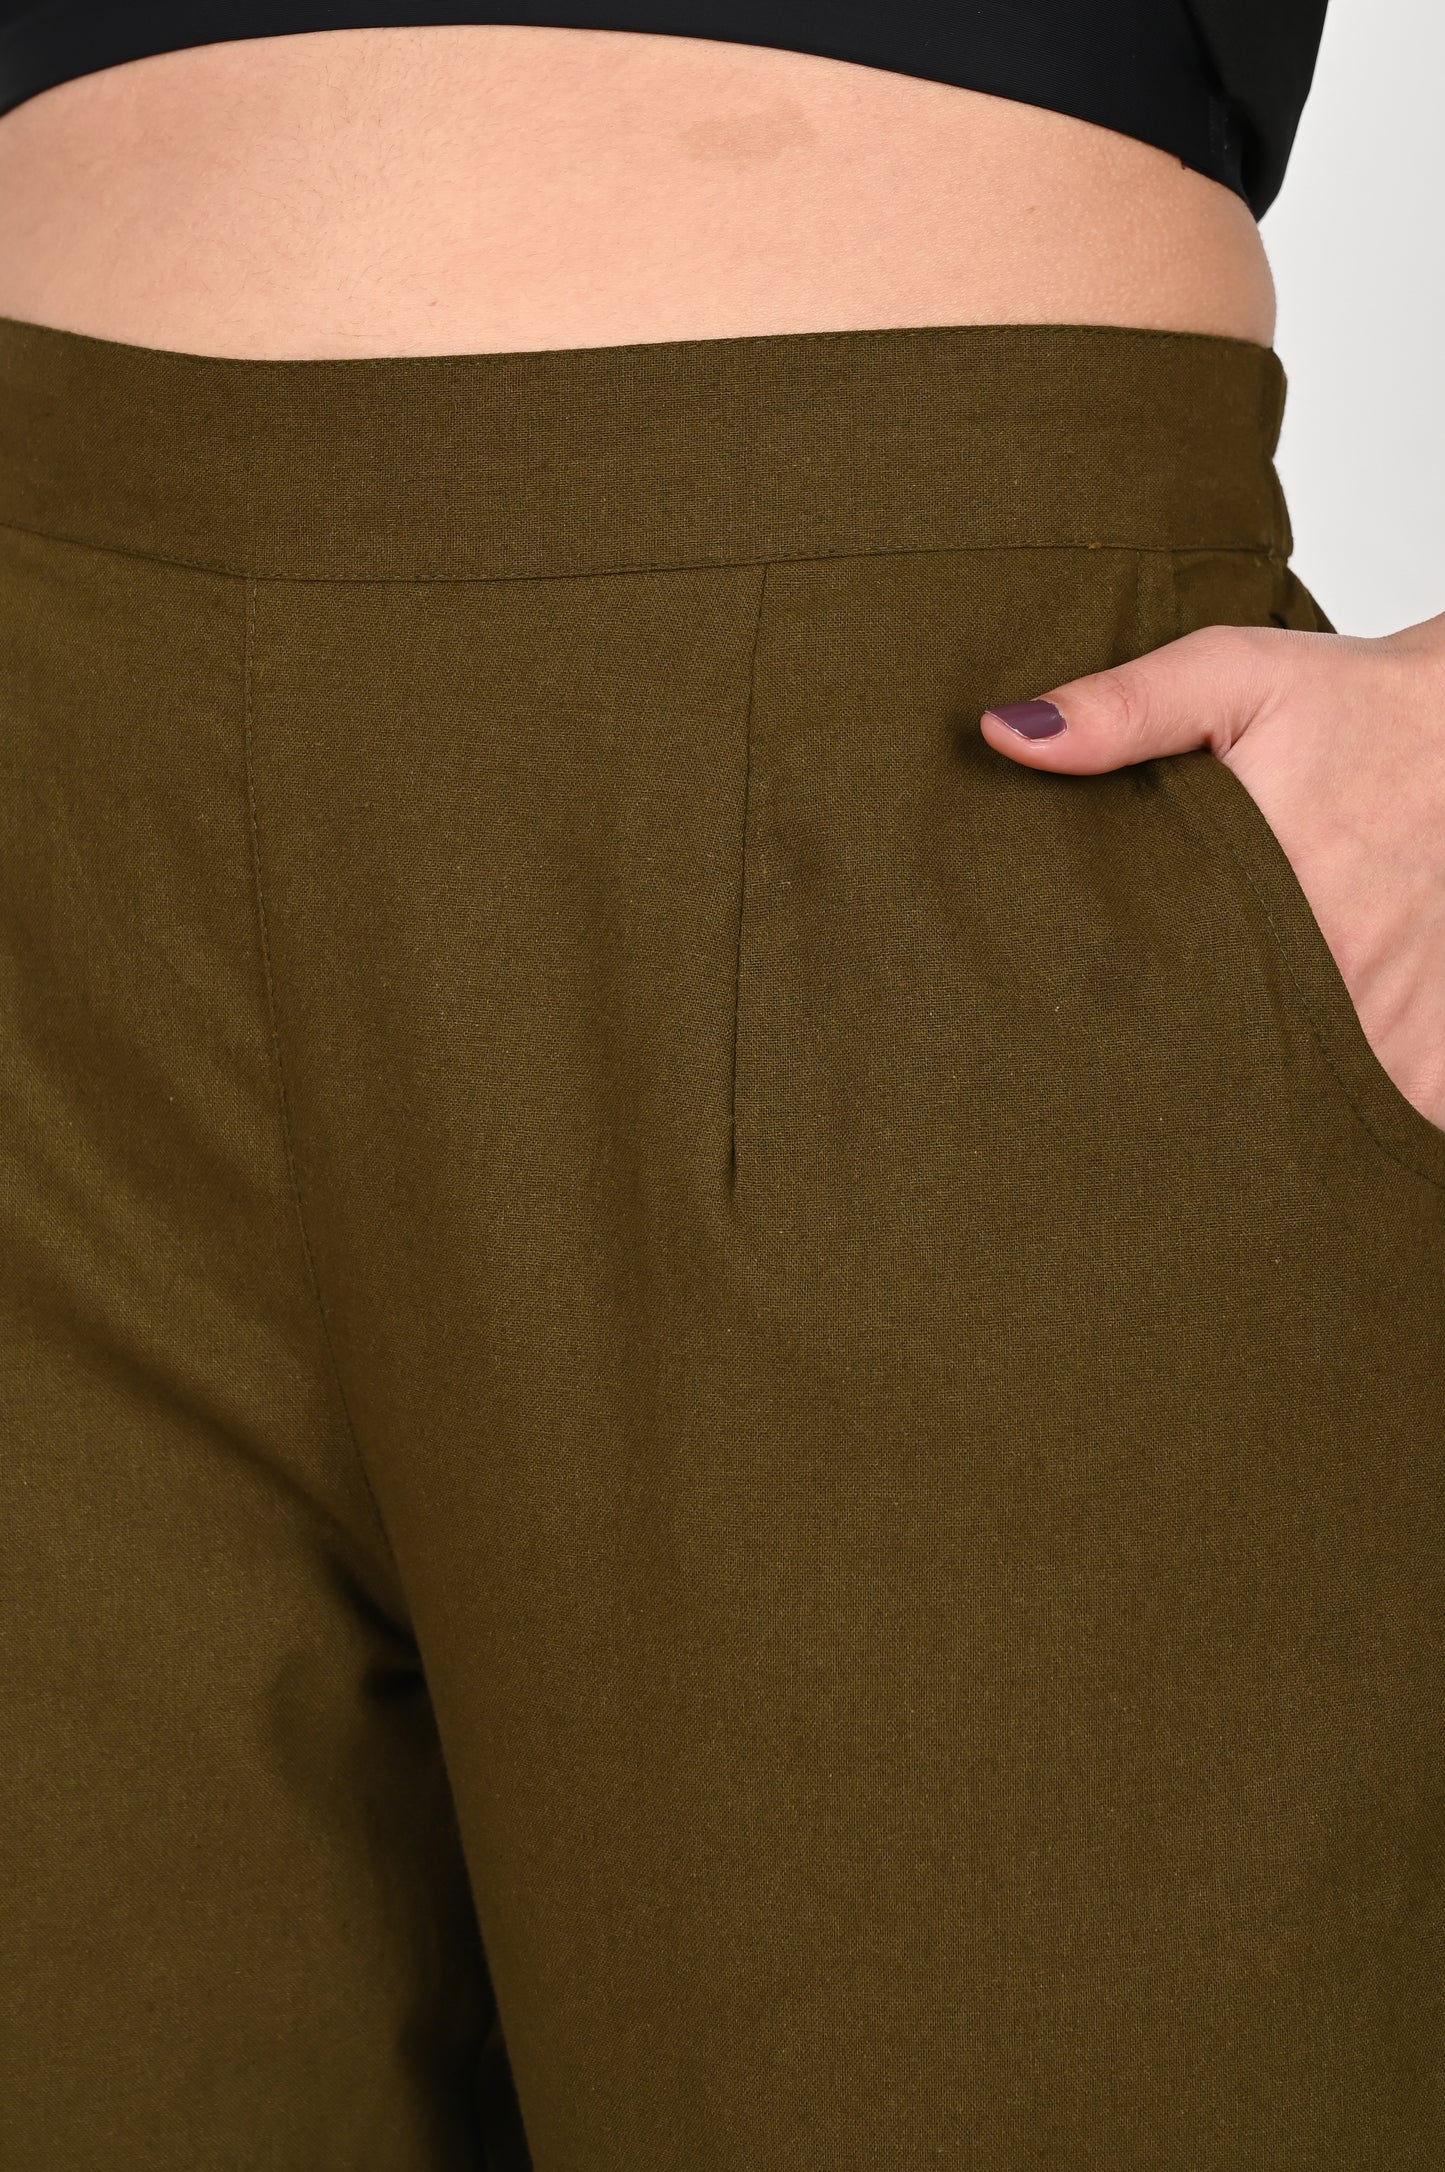 Olive Green Everyday Cotton Pant